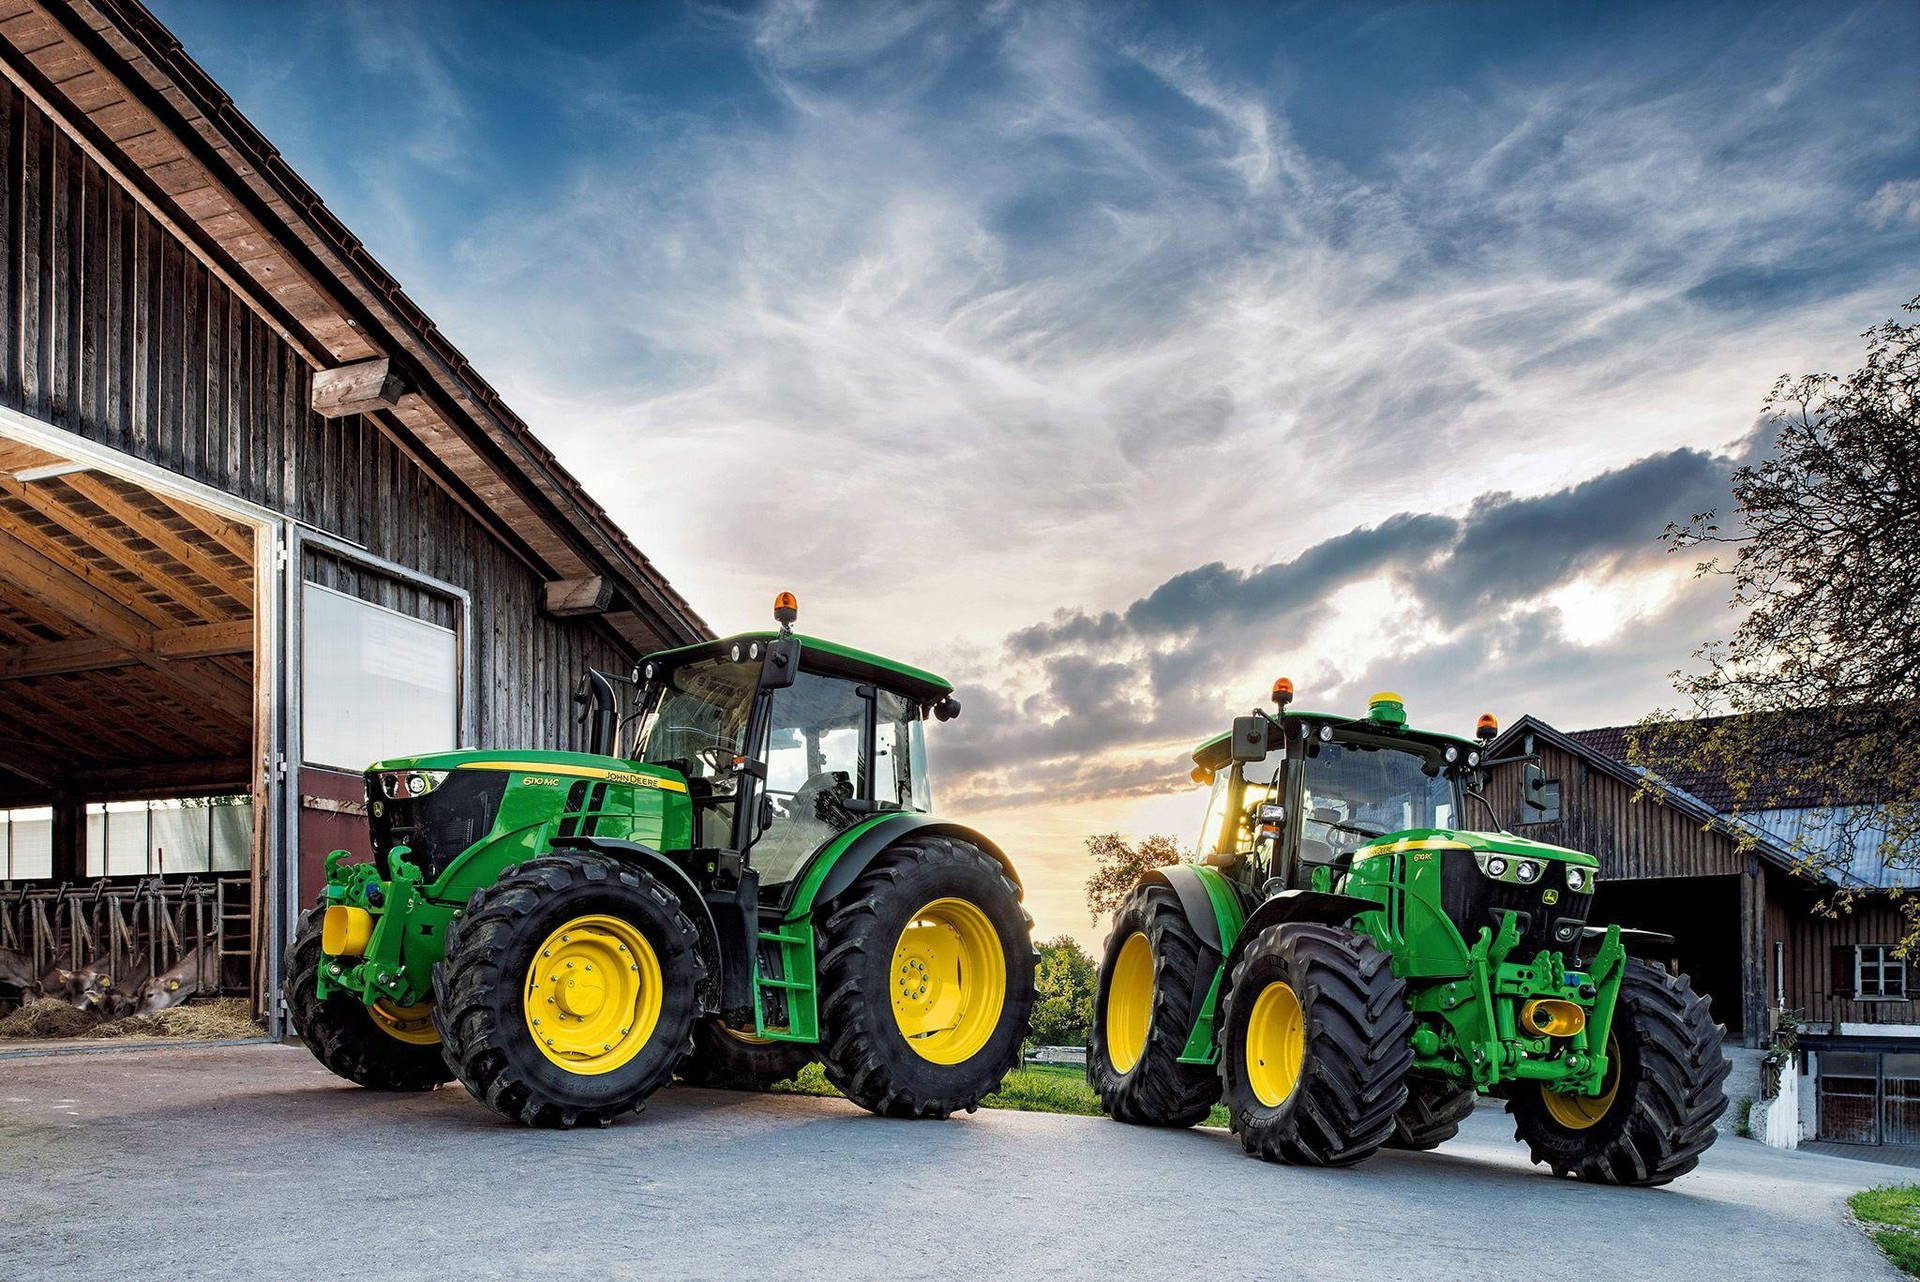 John Deere Tractors Workhorse At The Field Background